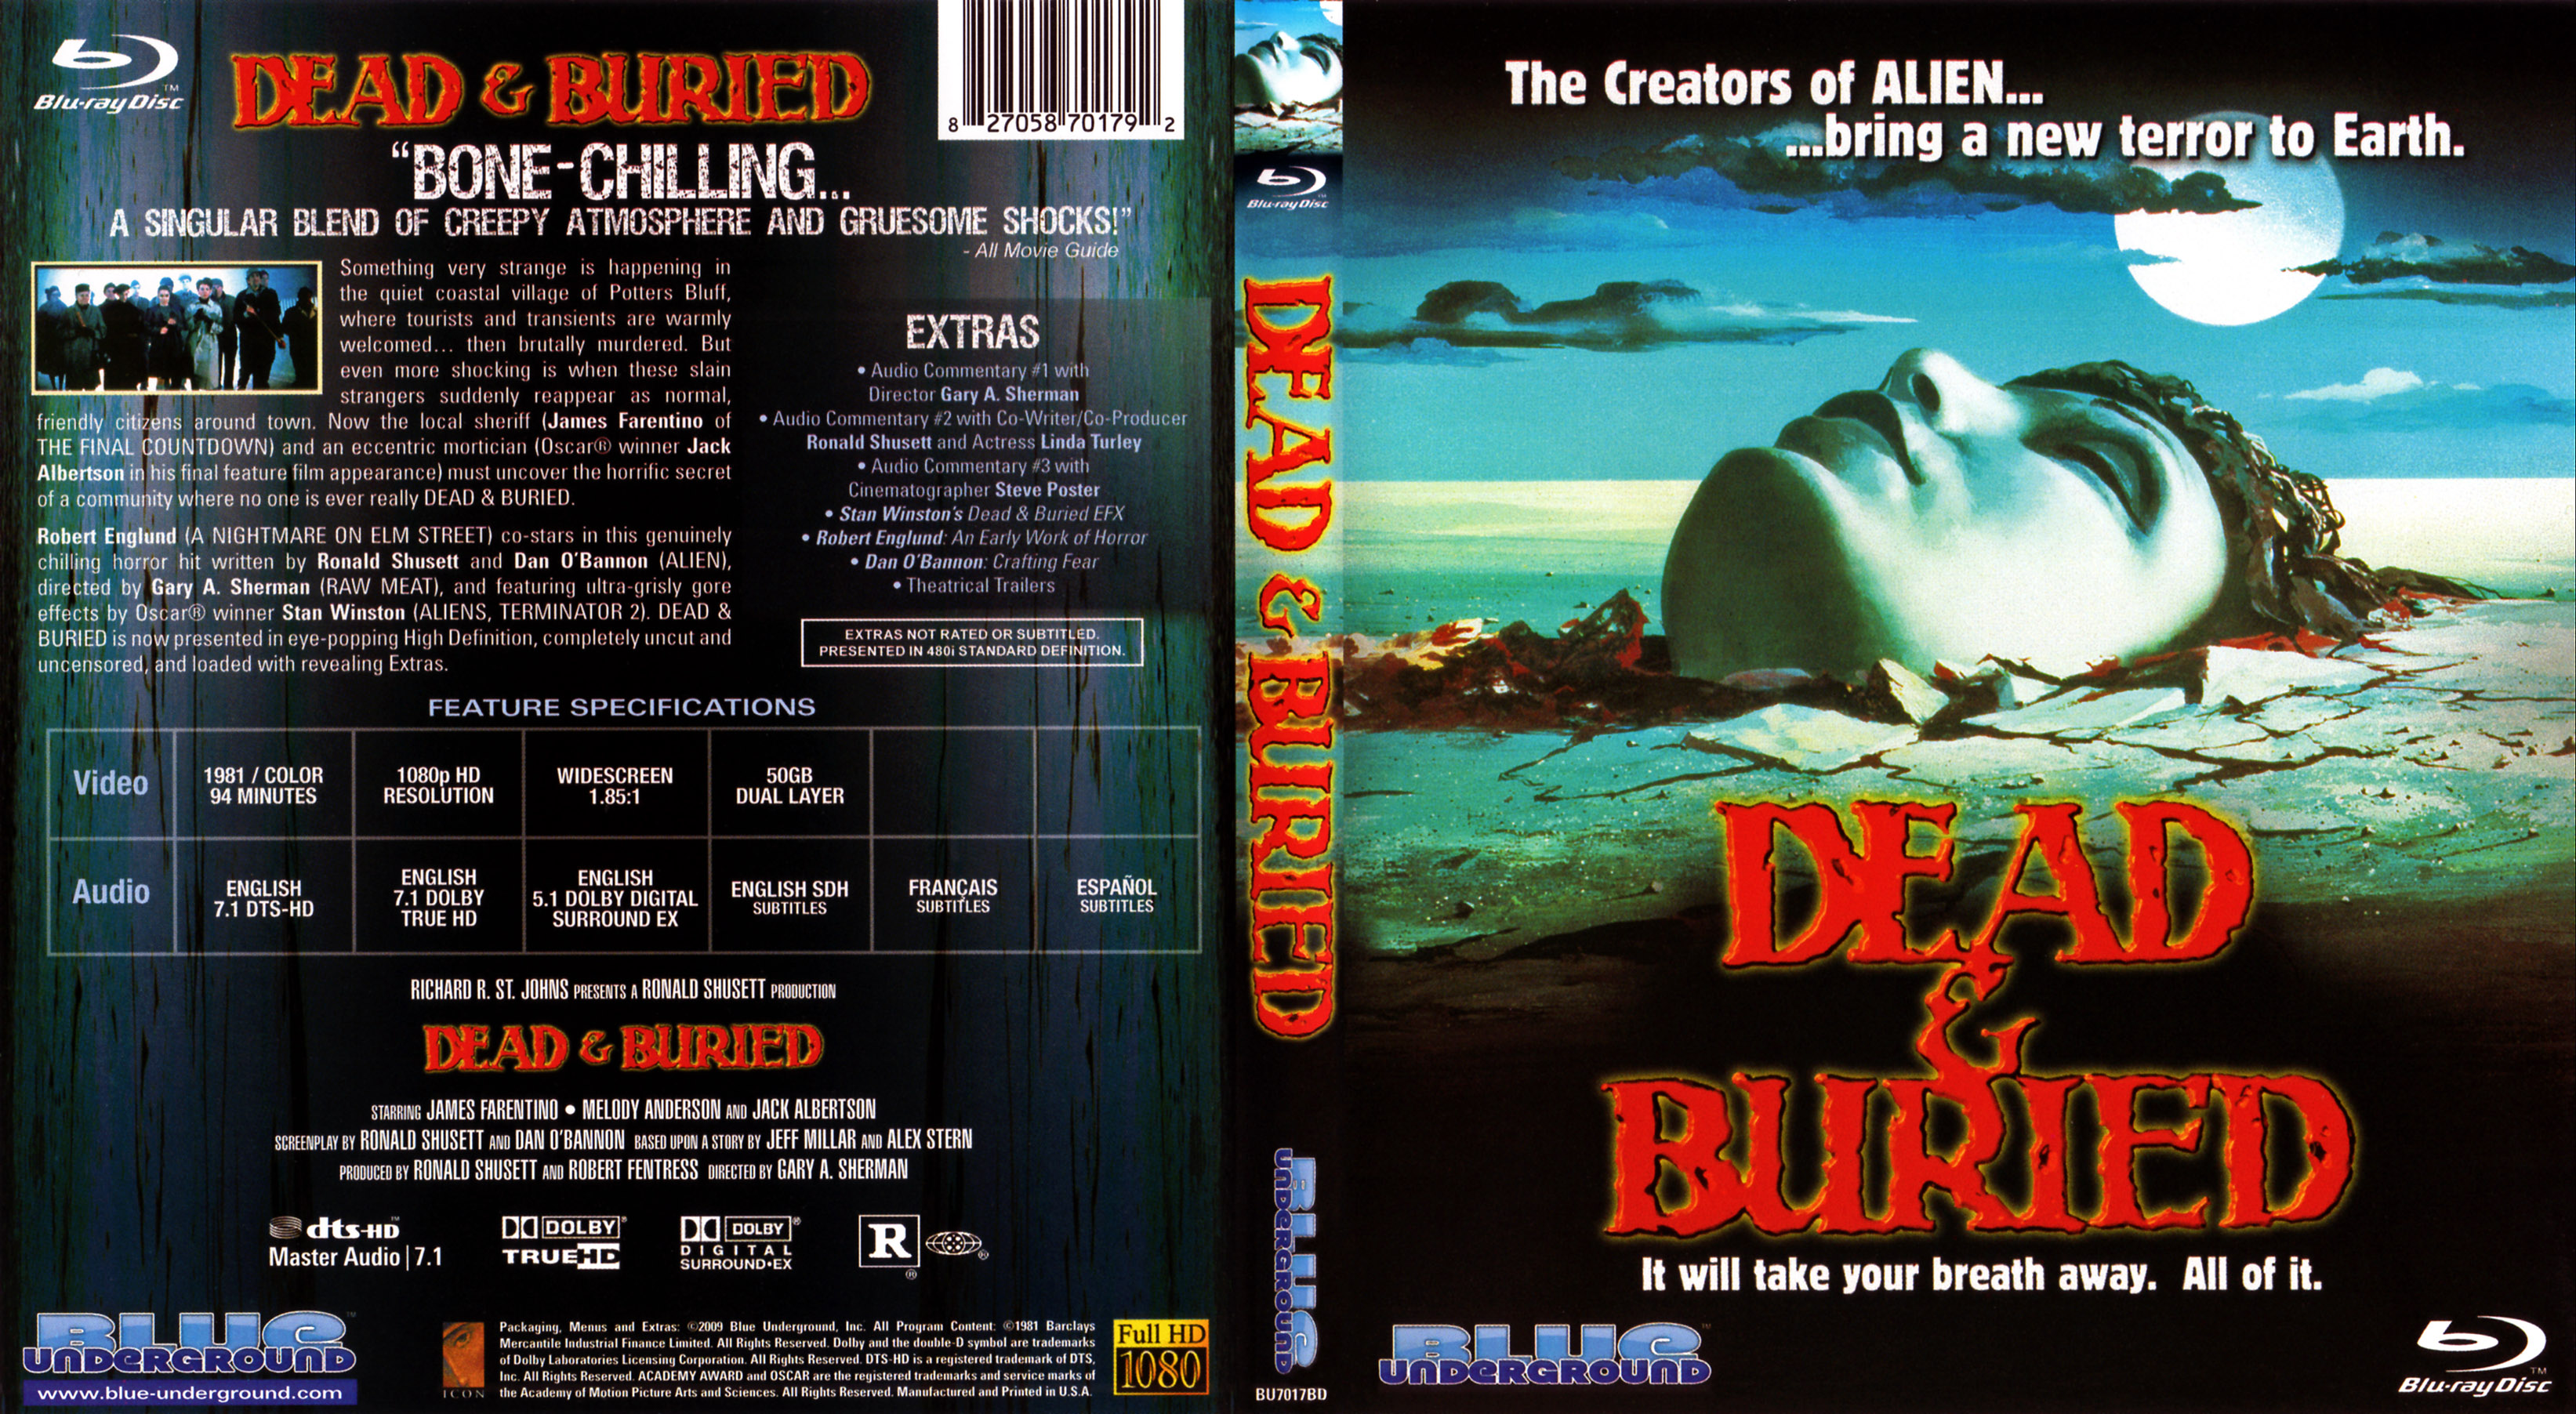 Jaquette DVD Dead & buried Zone 1 (BLU-RAY)